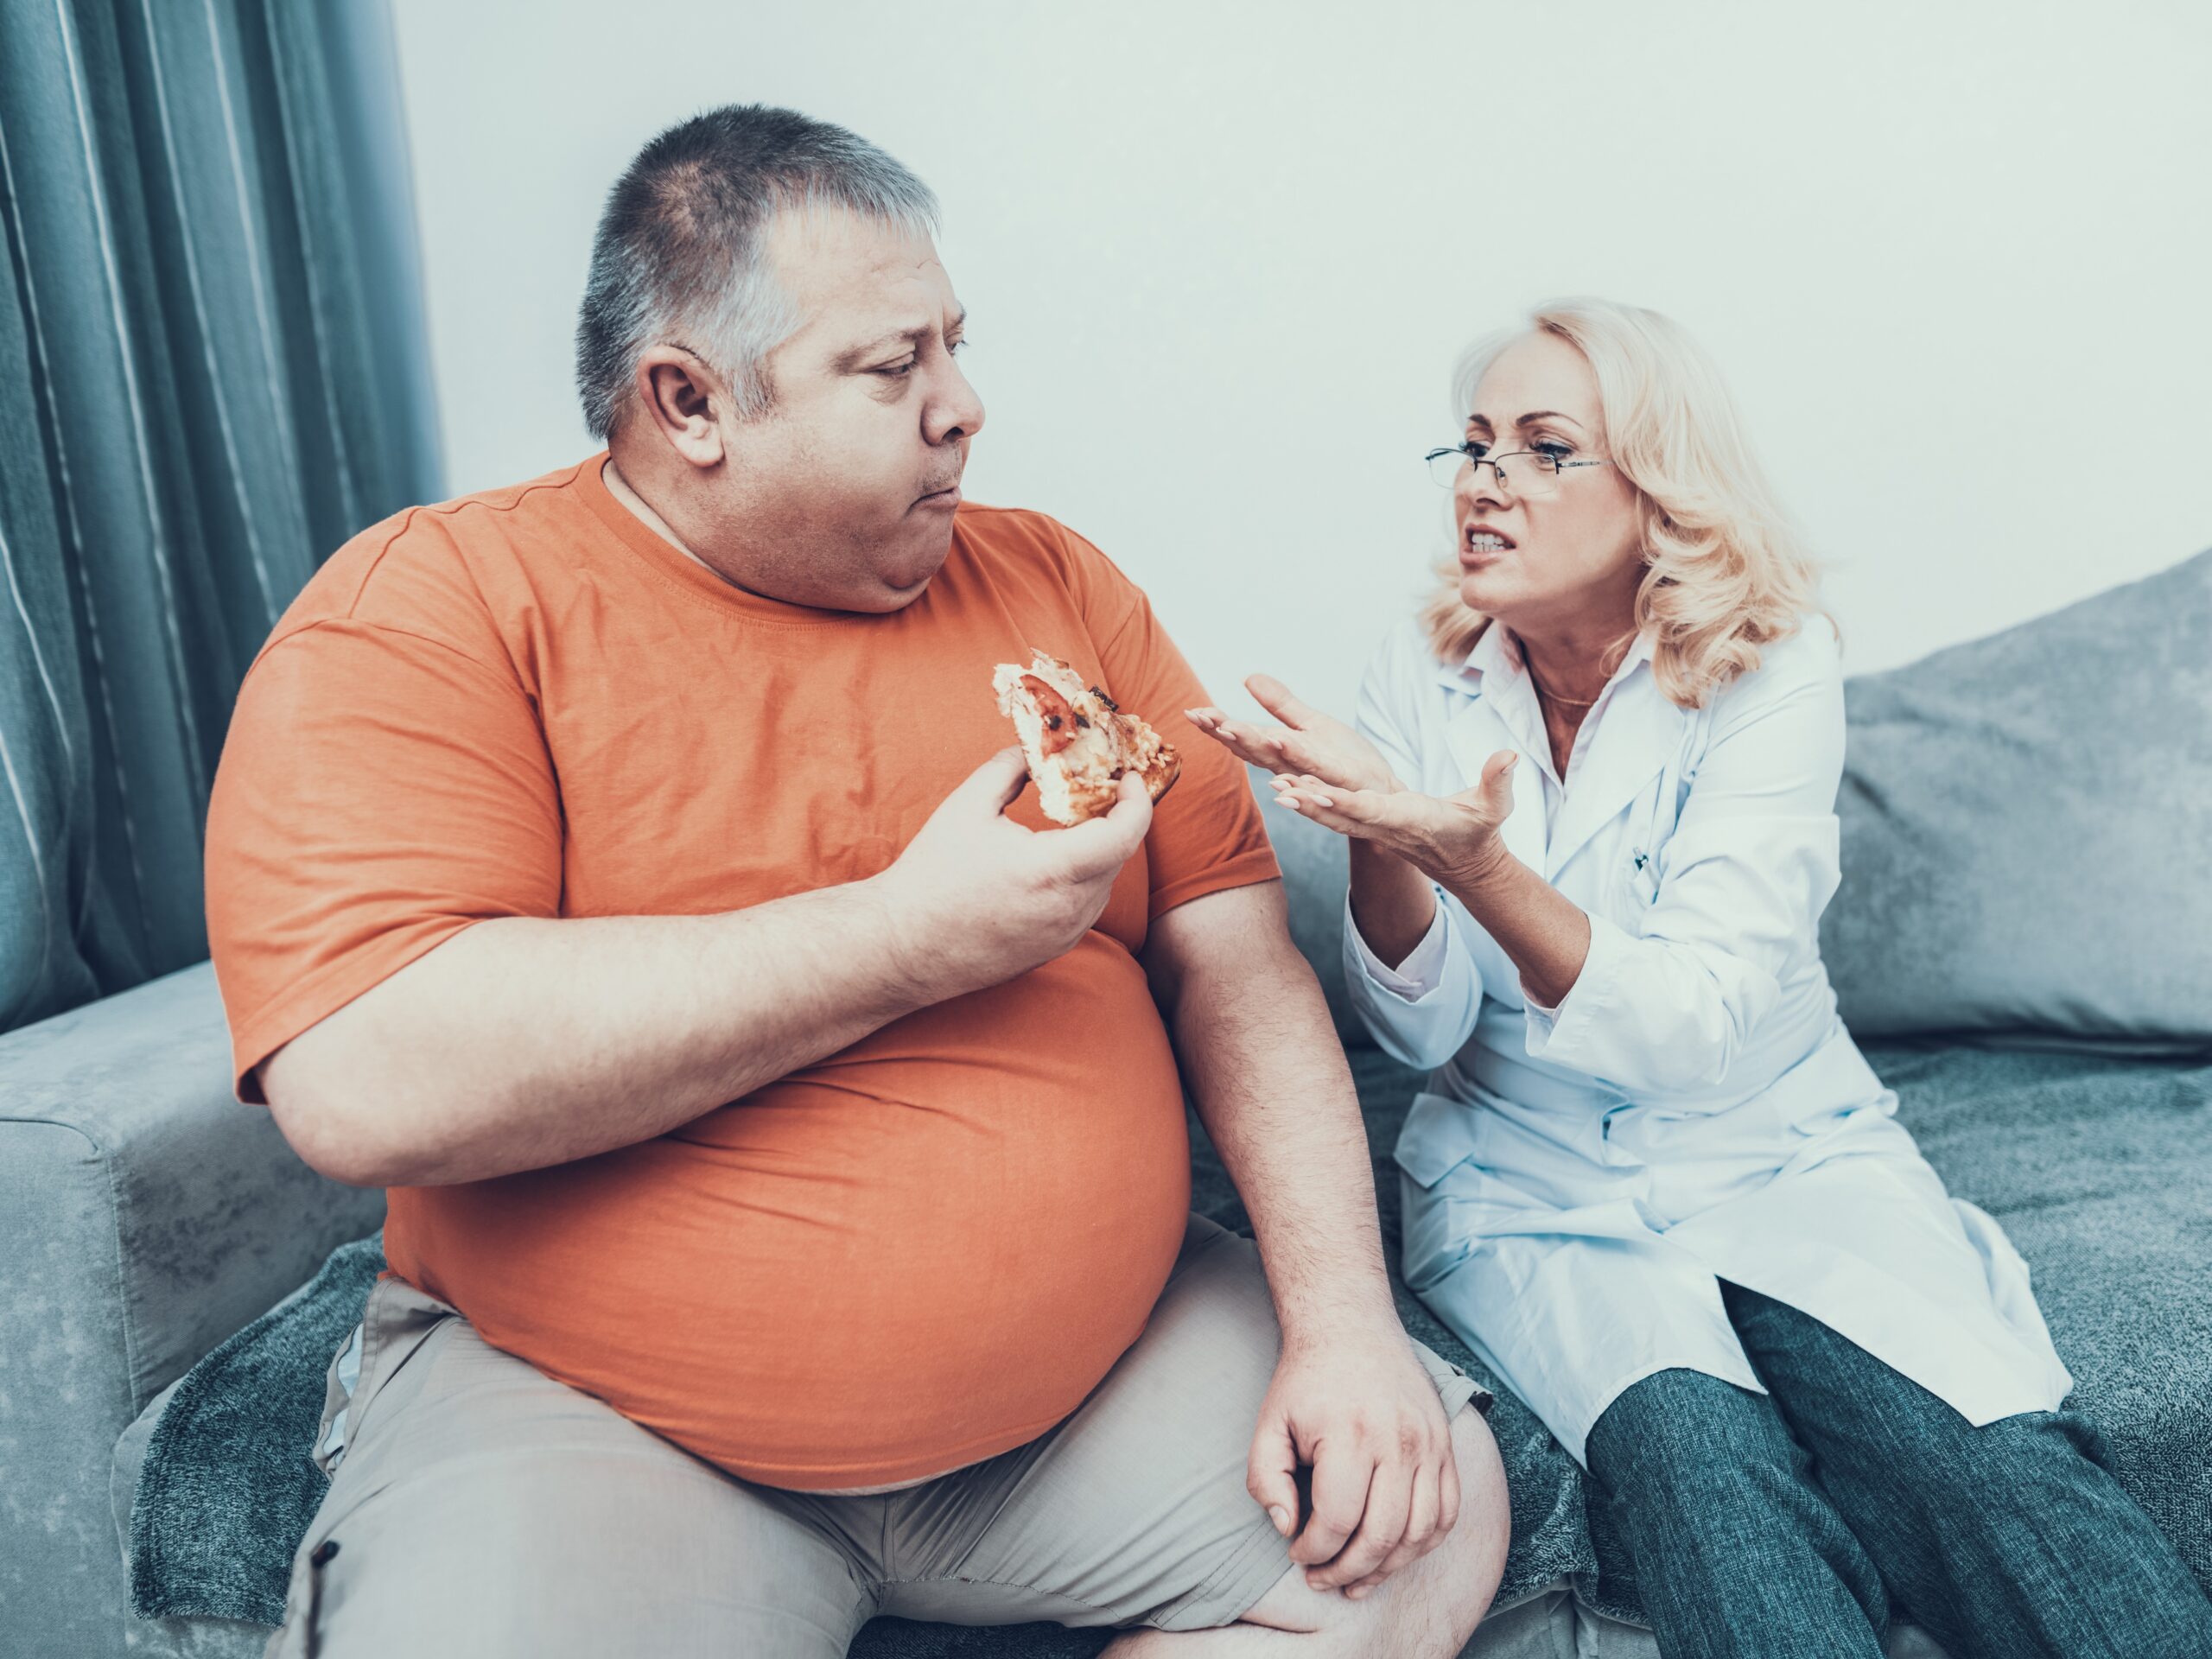 person in a larger body experiencing weight stigma by being bullied for eating pizza 